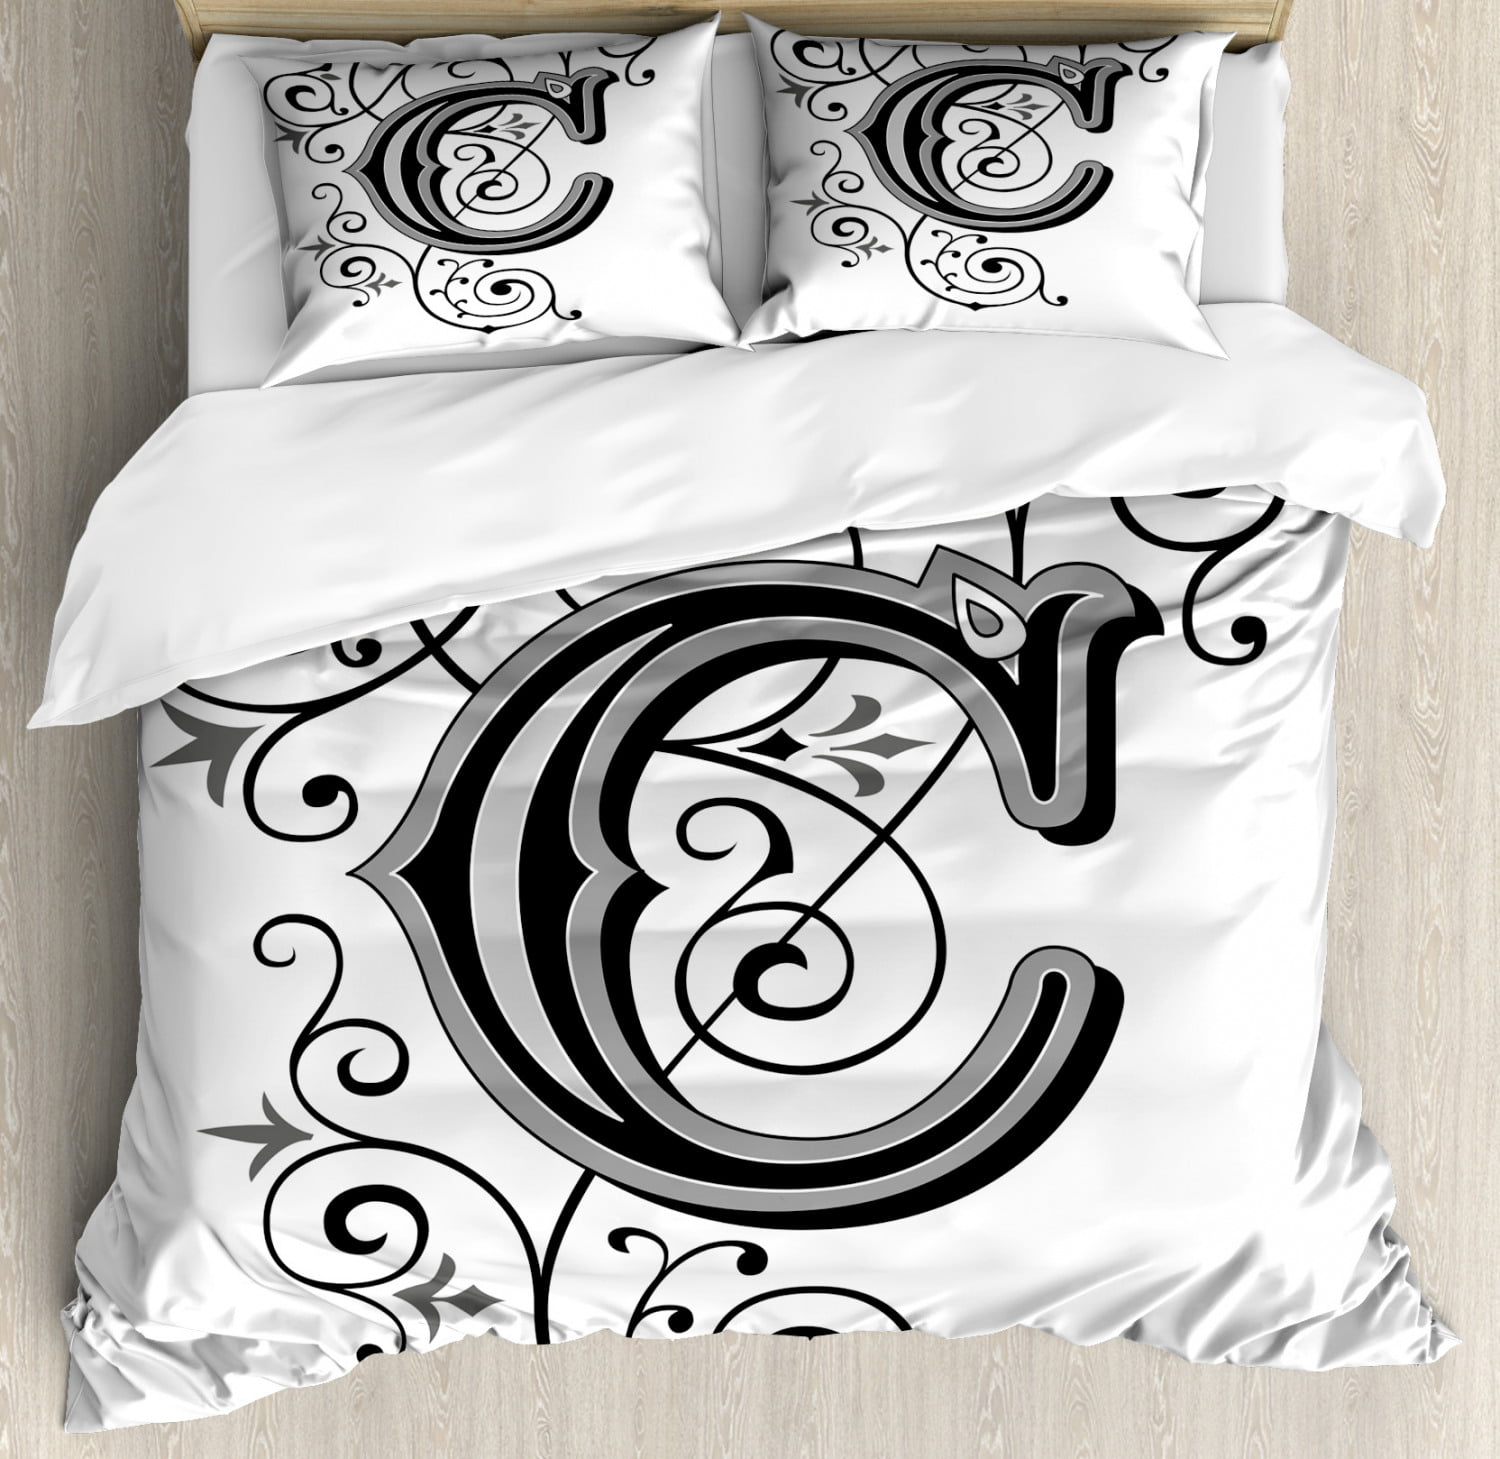 Letter C Duvet Cover Set Victorian Inspired Gothic Style Capital